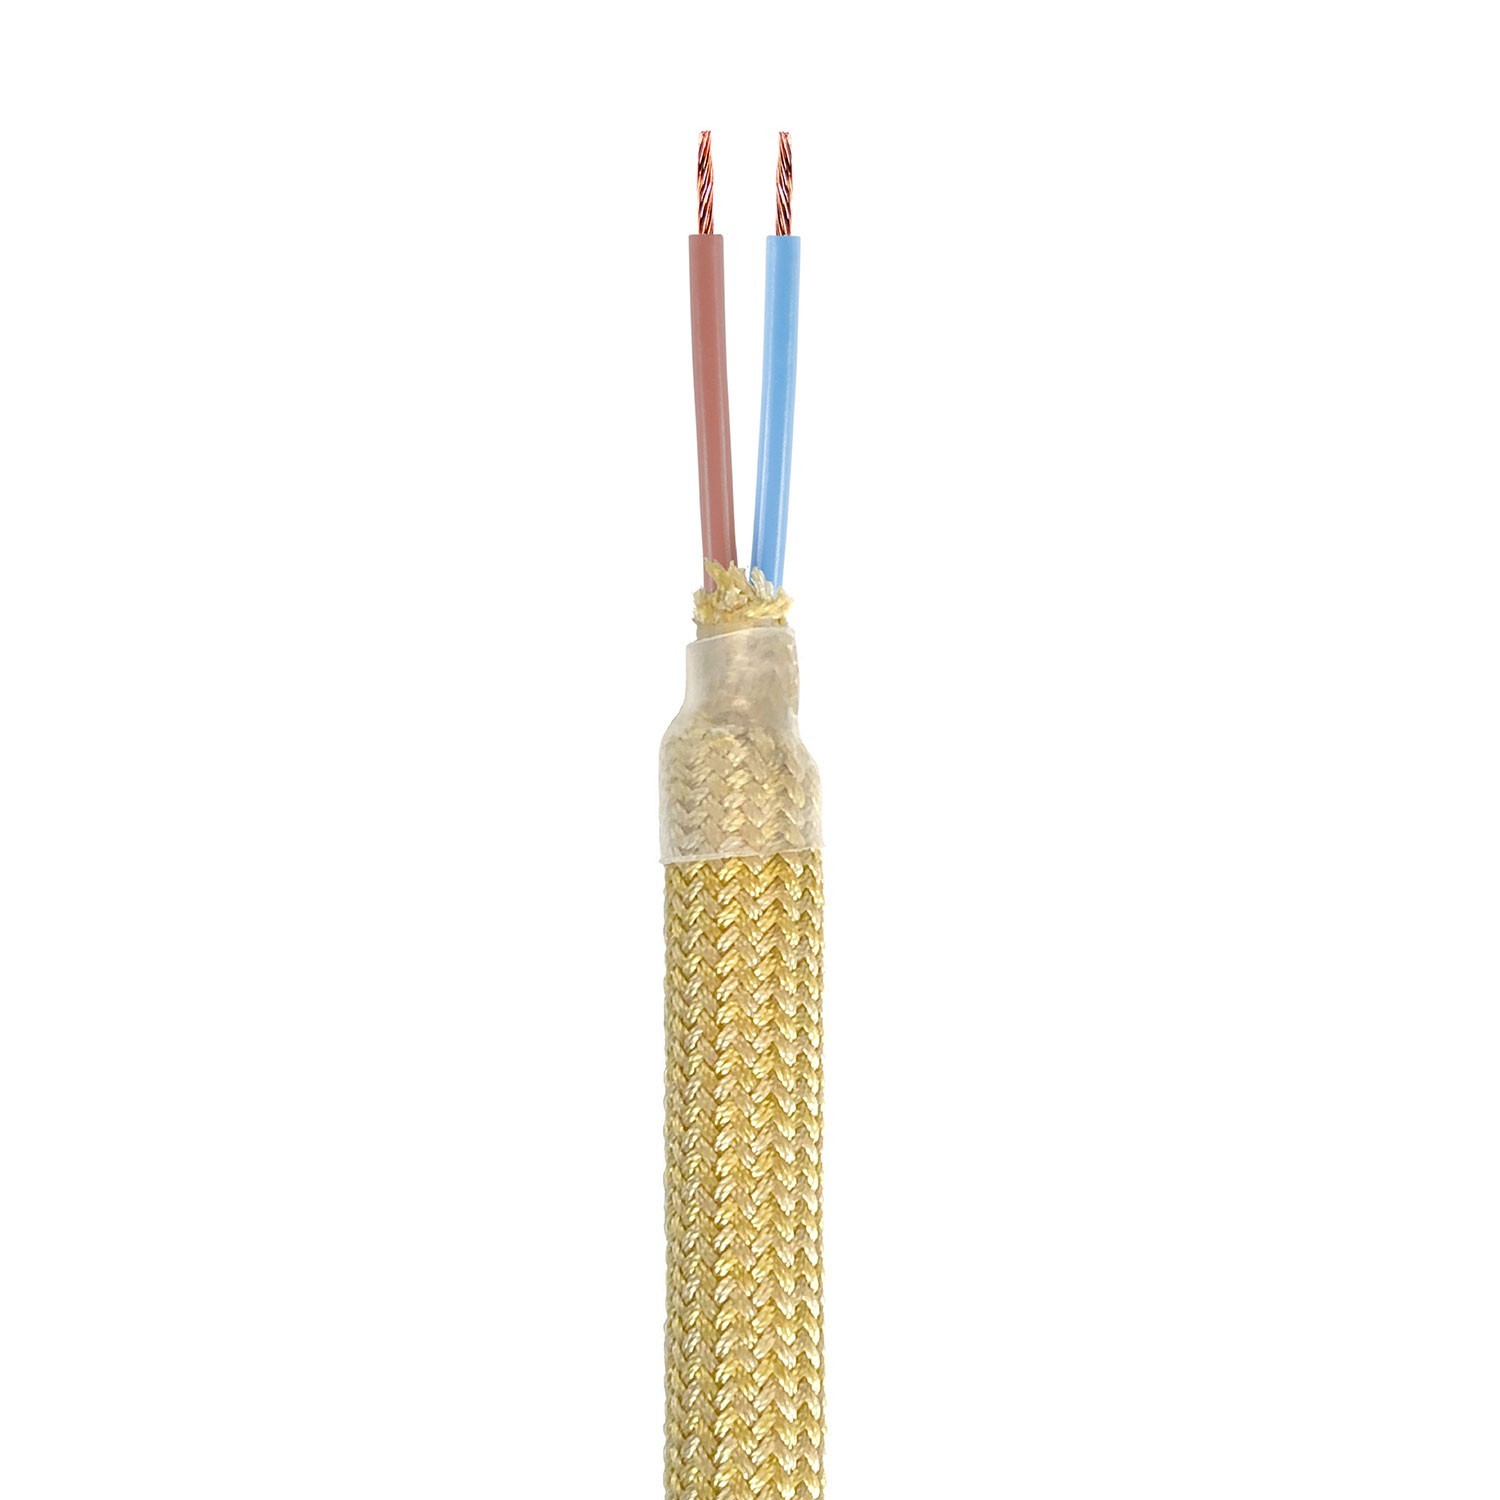 Kit Creative Flex flexible tube in mustard RM79 textile lining with metal terminals